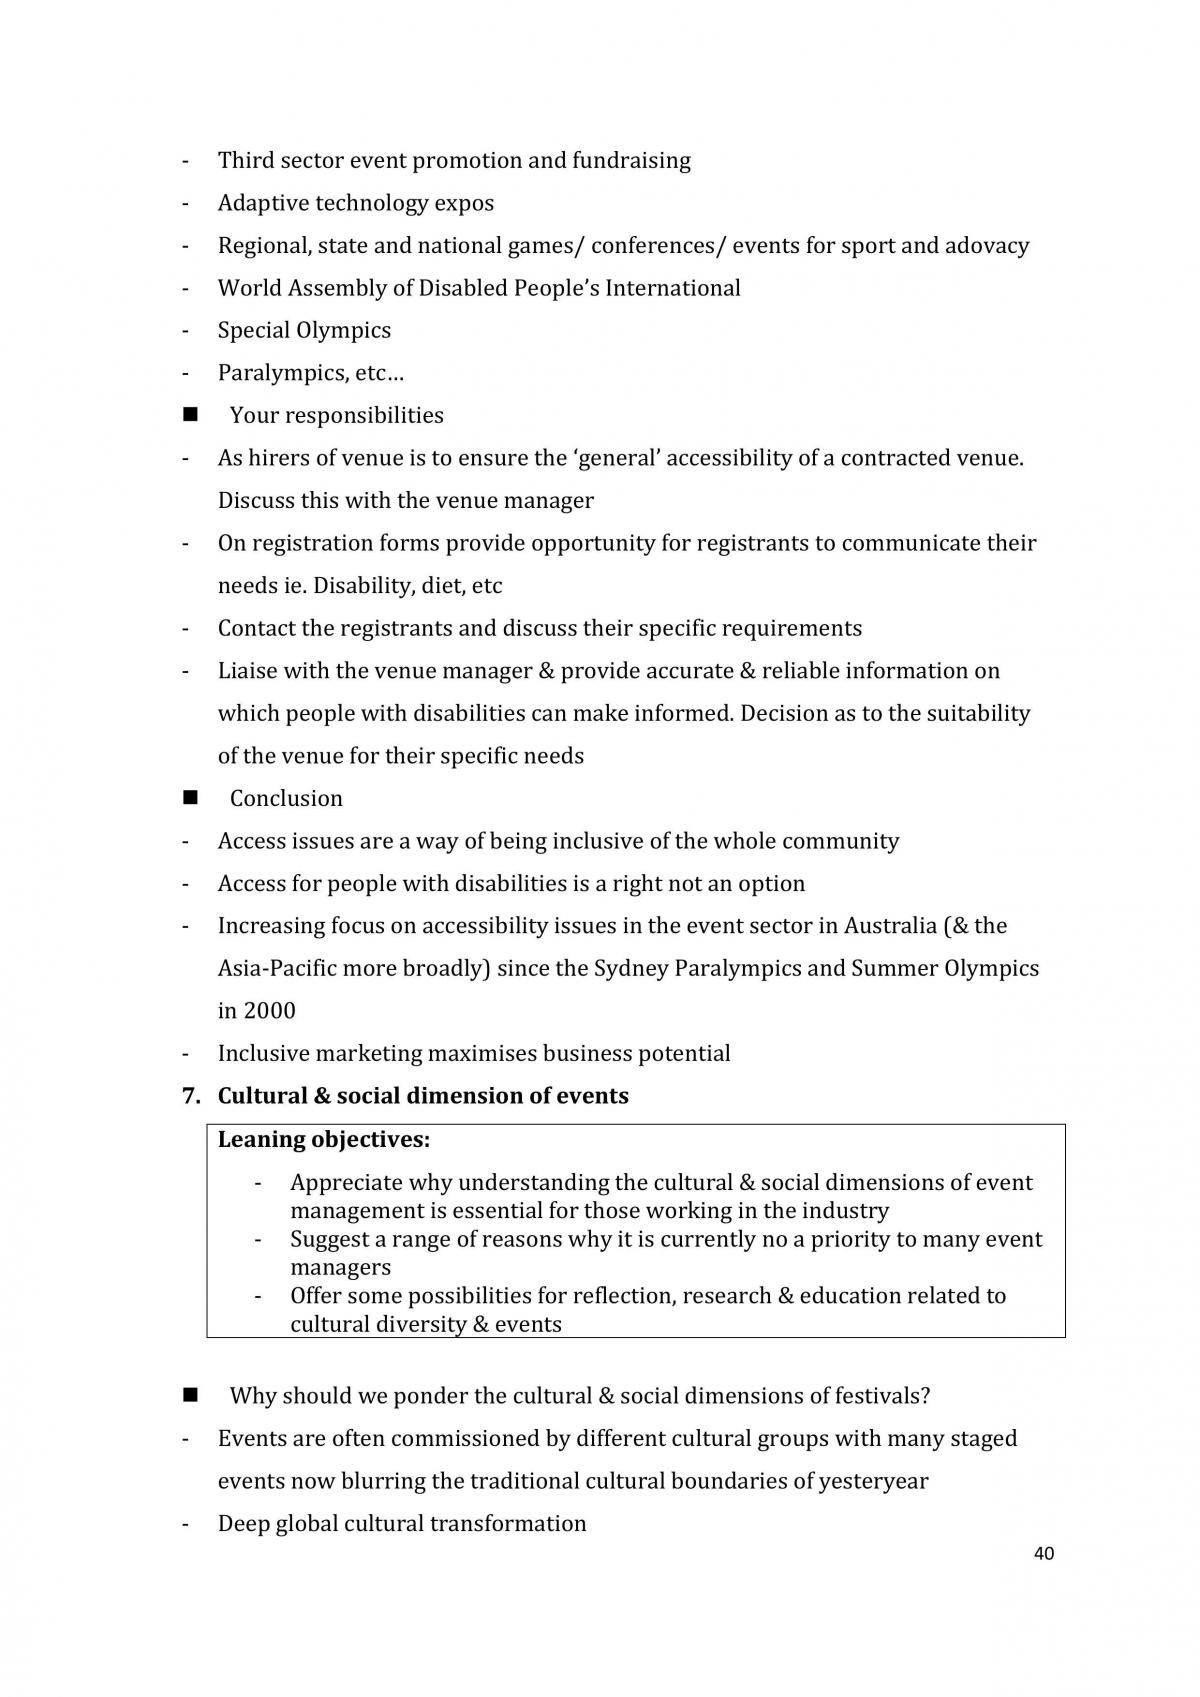 EVNT2000 Examination Notes - Page 40